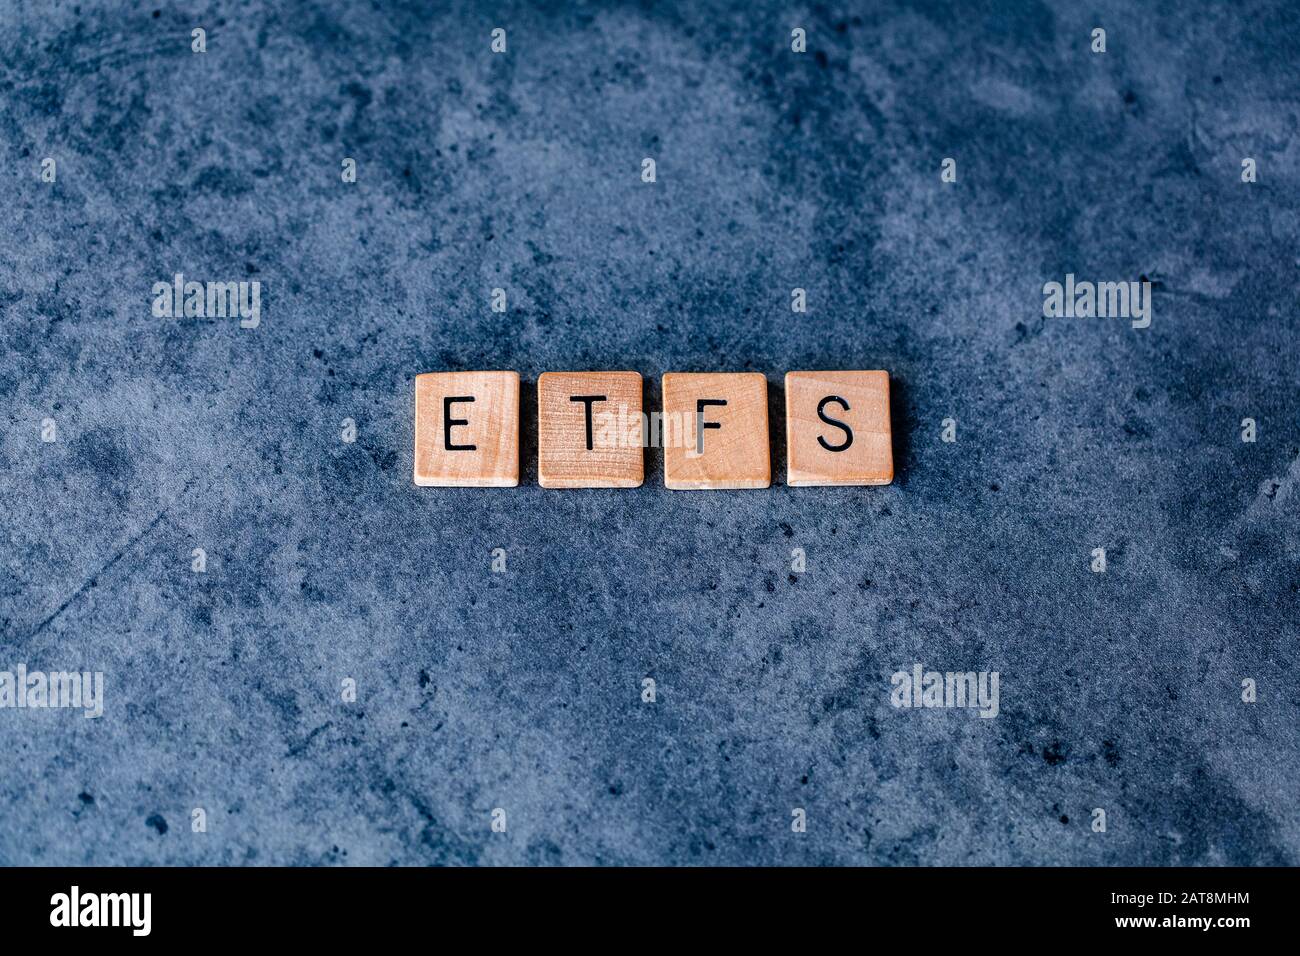 'ETFs' (Exchange-traded funds) spelled out in wooden letter tiles on a dark rough background Stock Photo